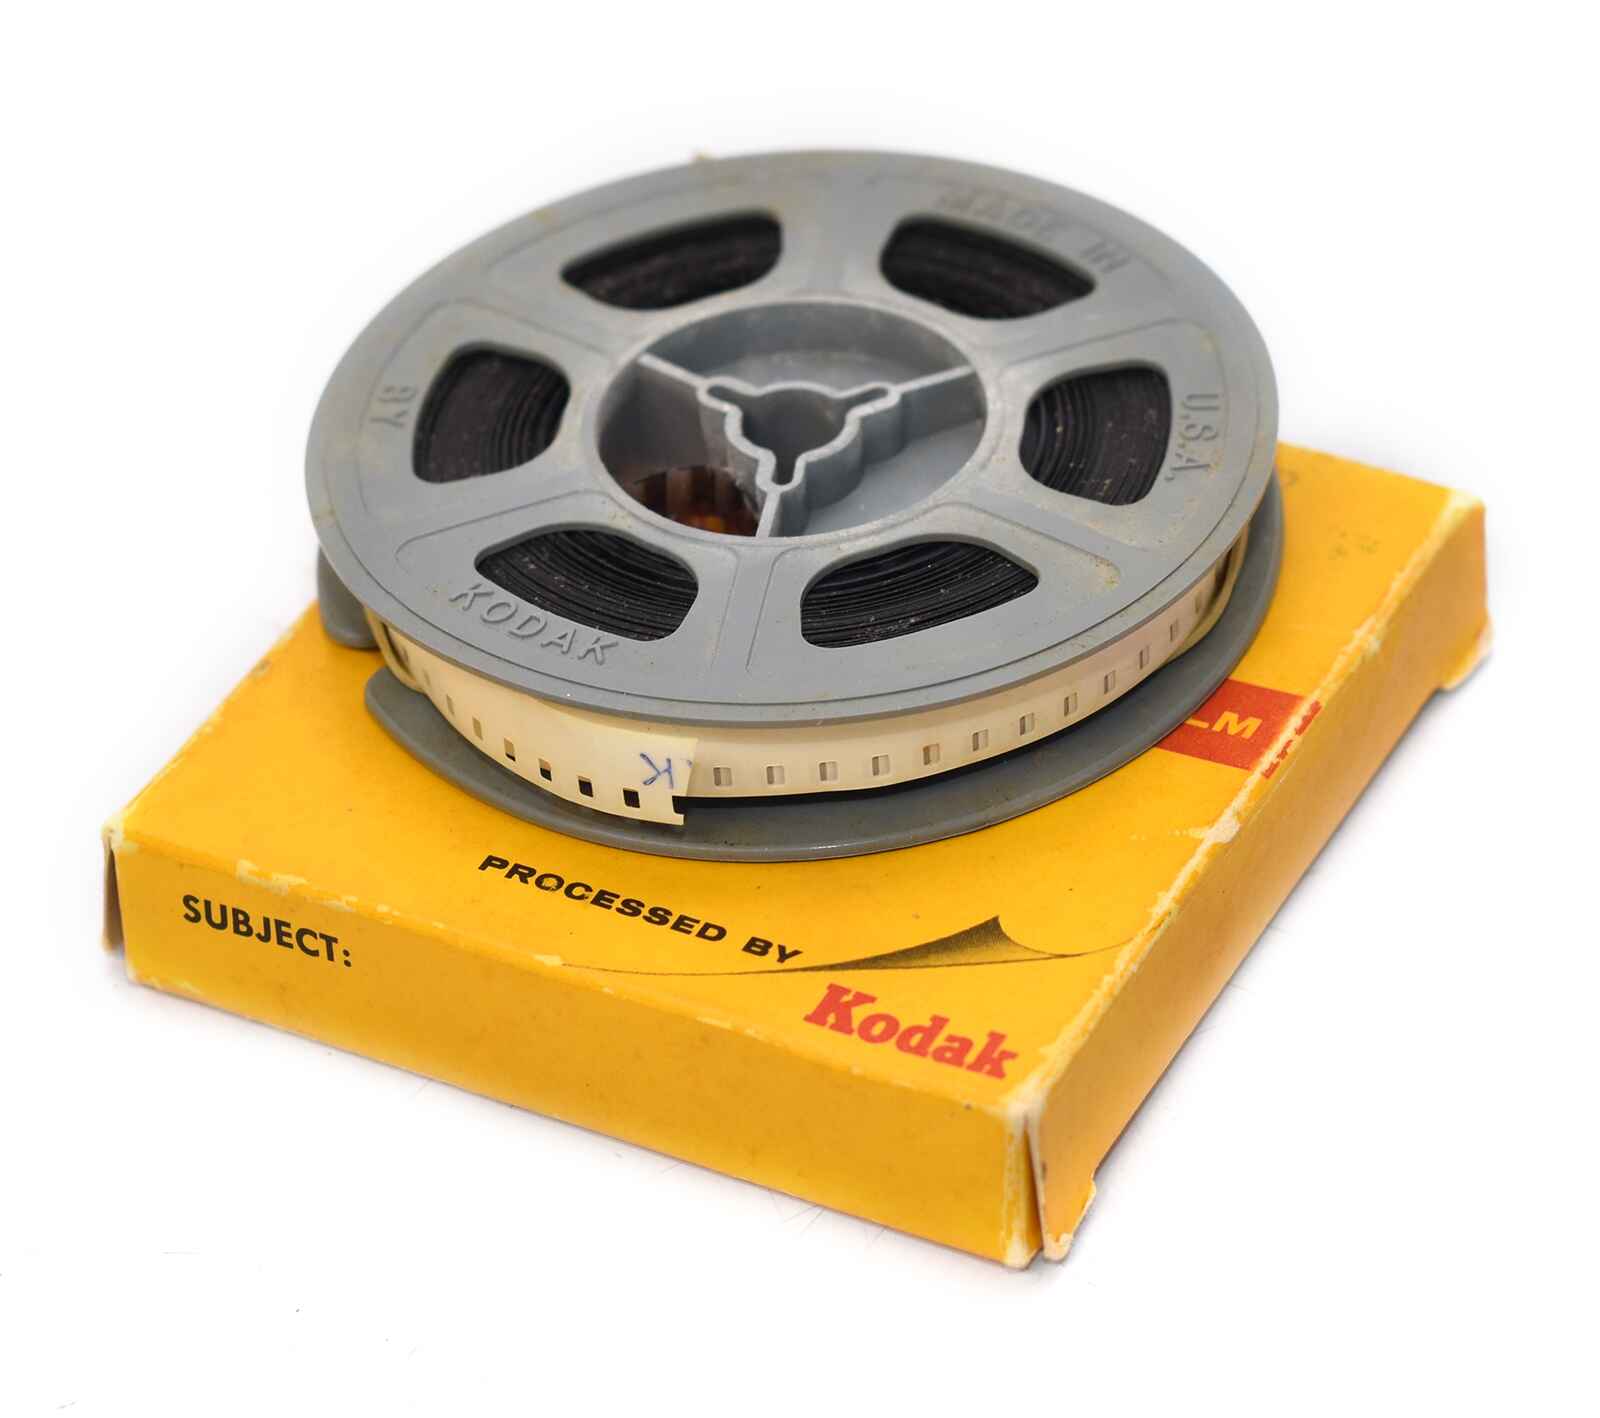 Transfer Super 8, Standard 8mm Cine Film to DVD and Digital MOV files for  editing